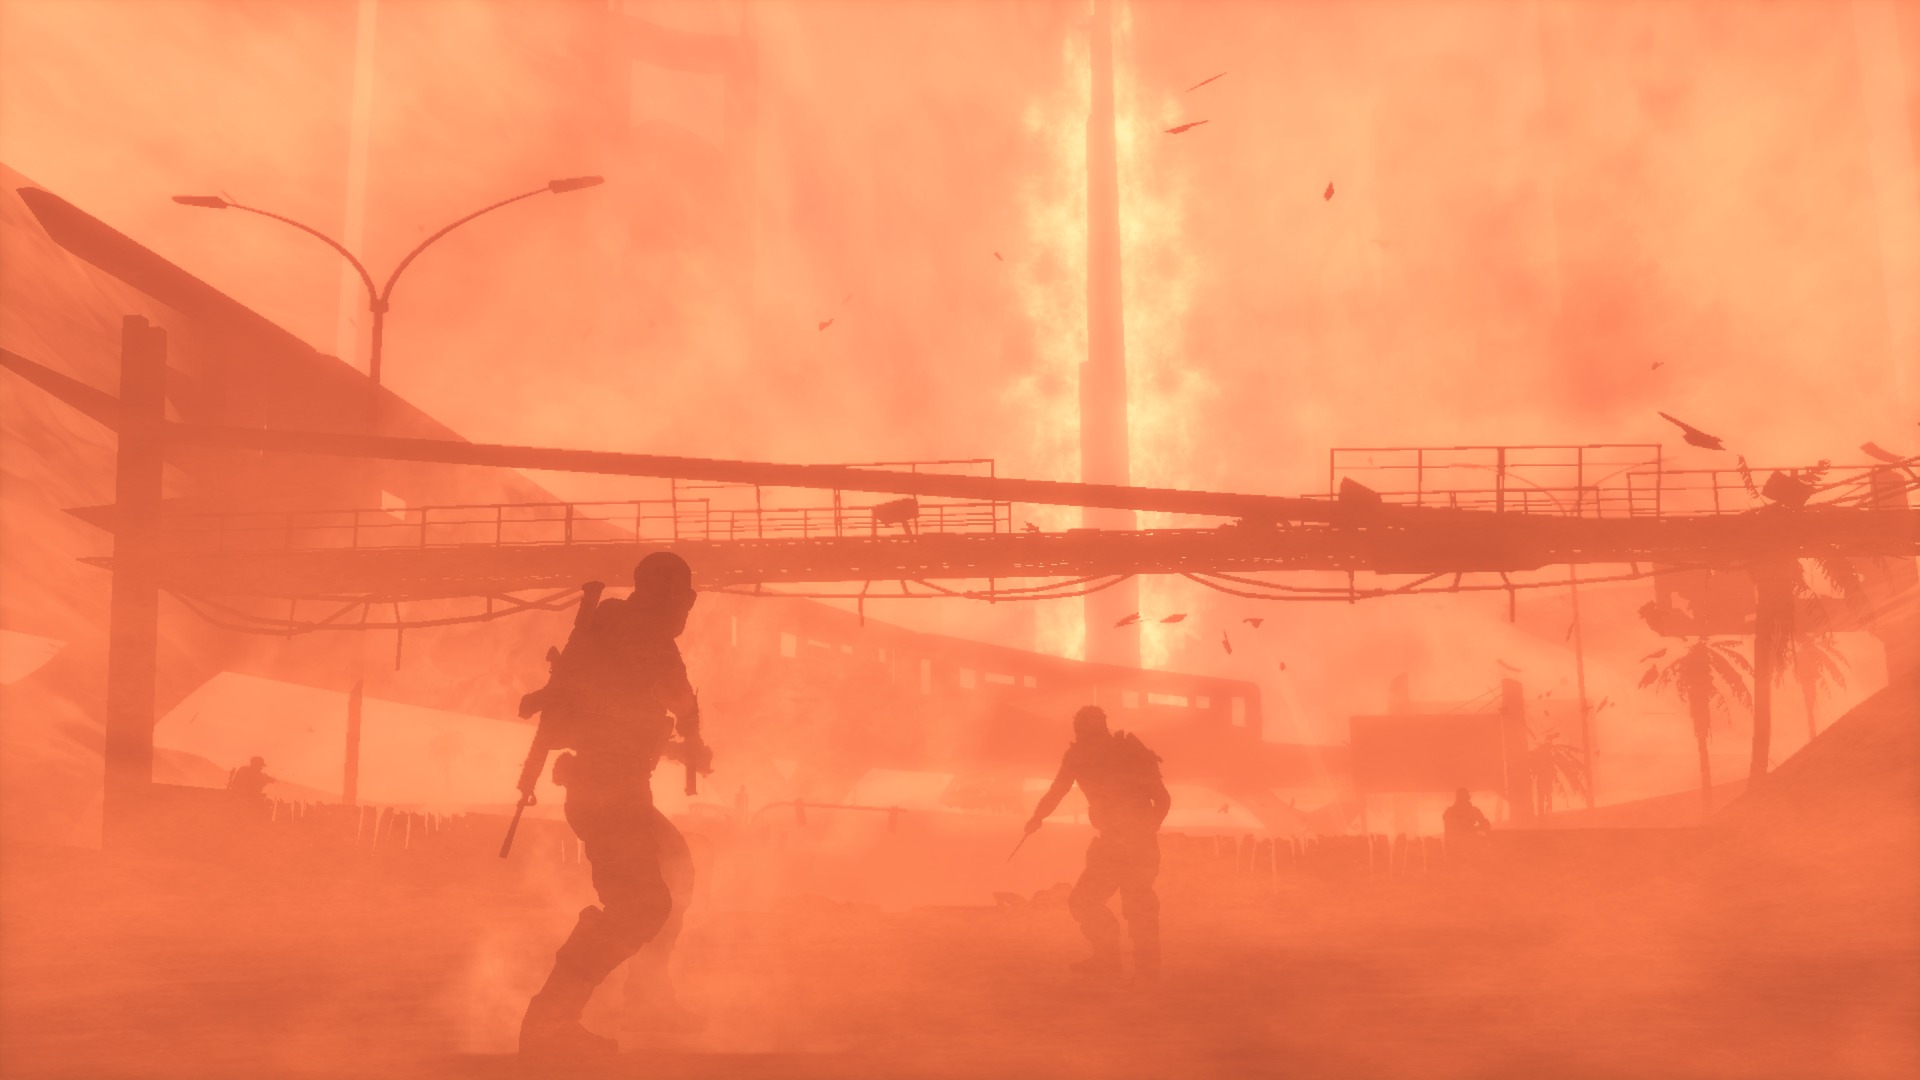 Spec Ops The Line Images 